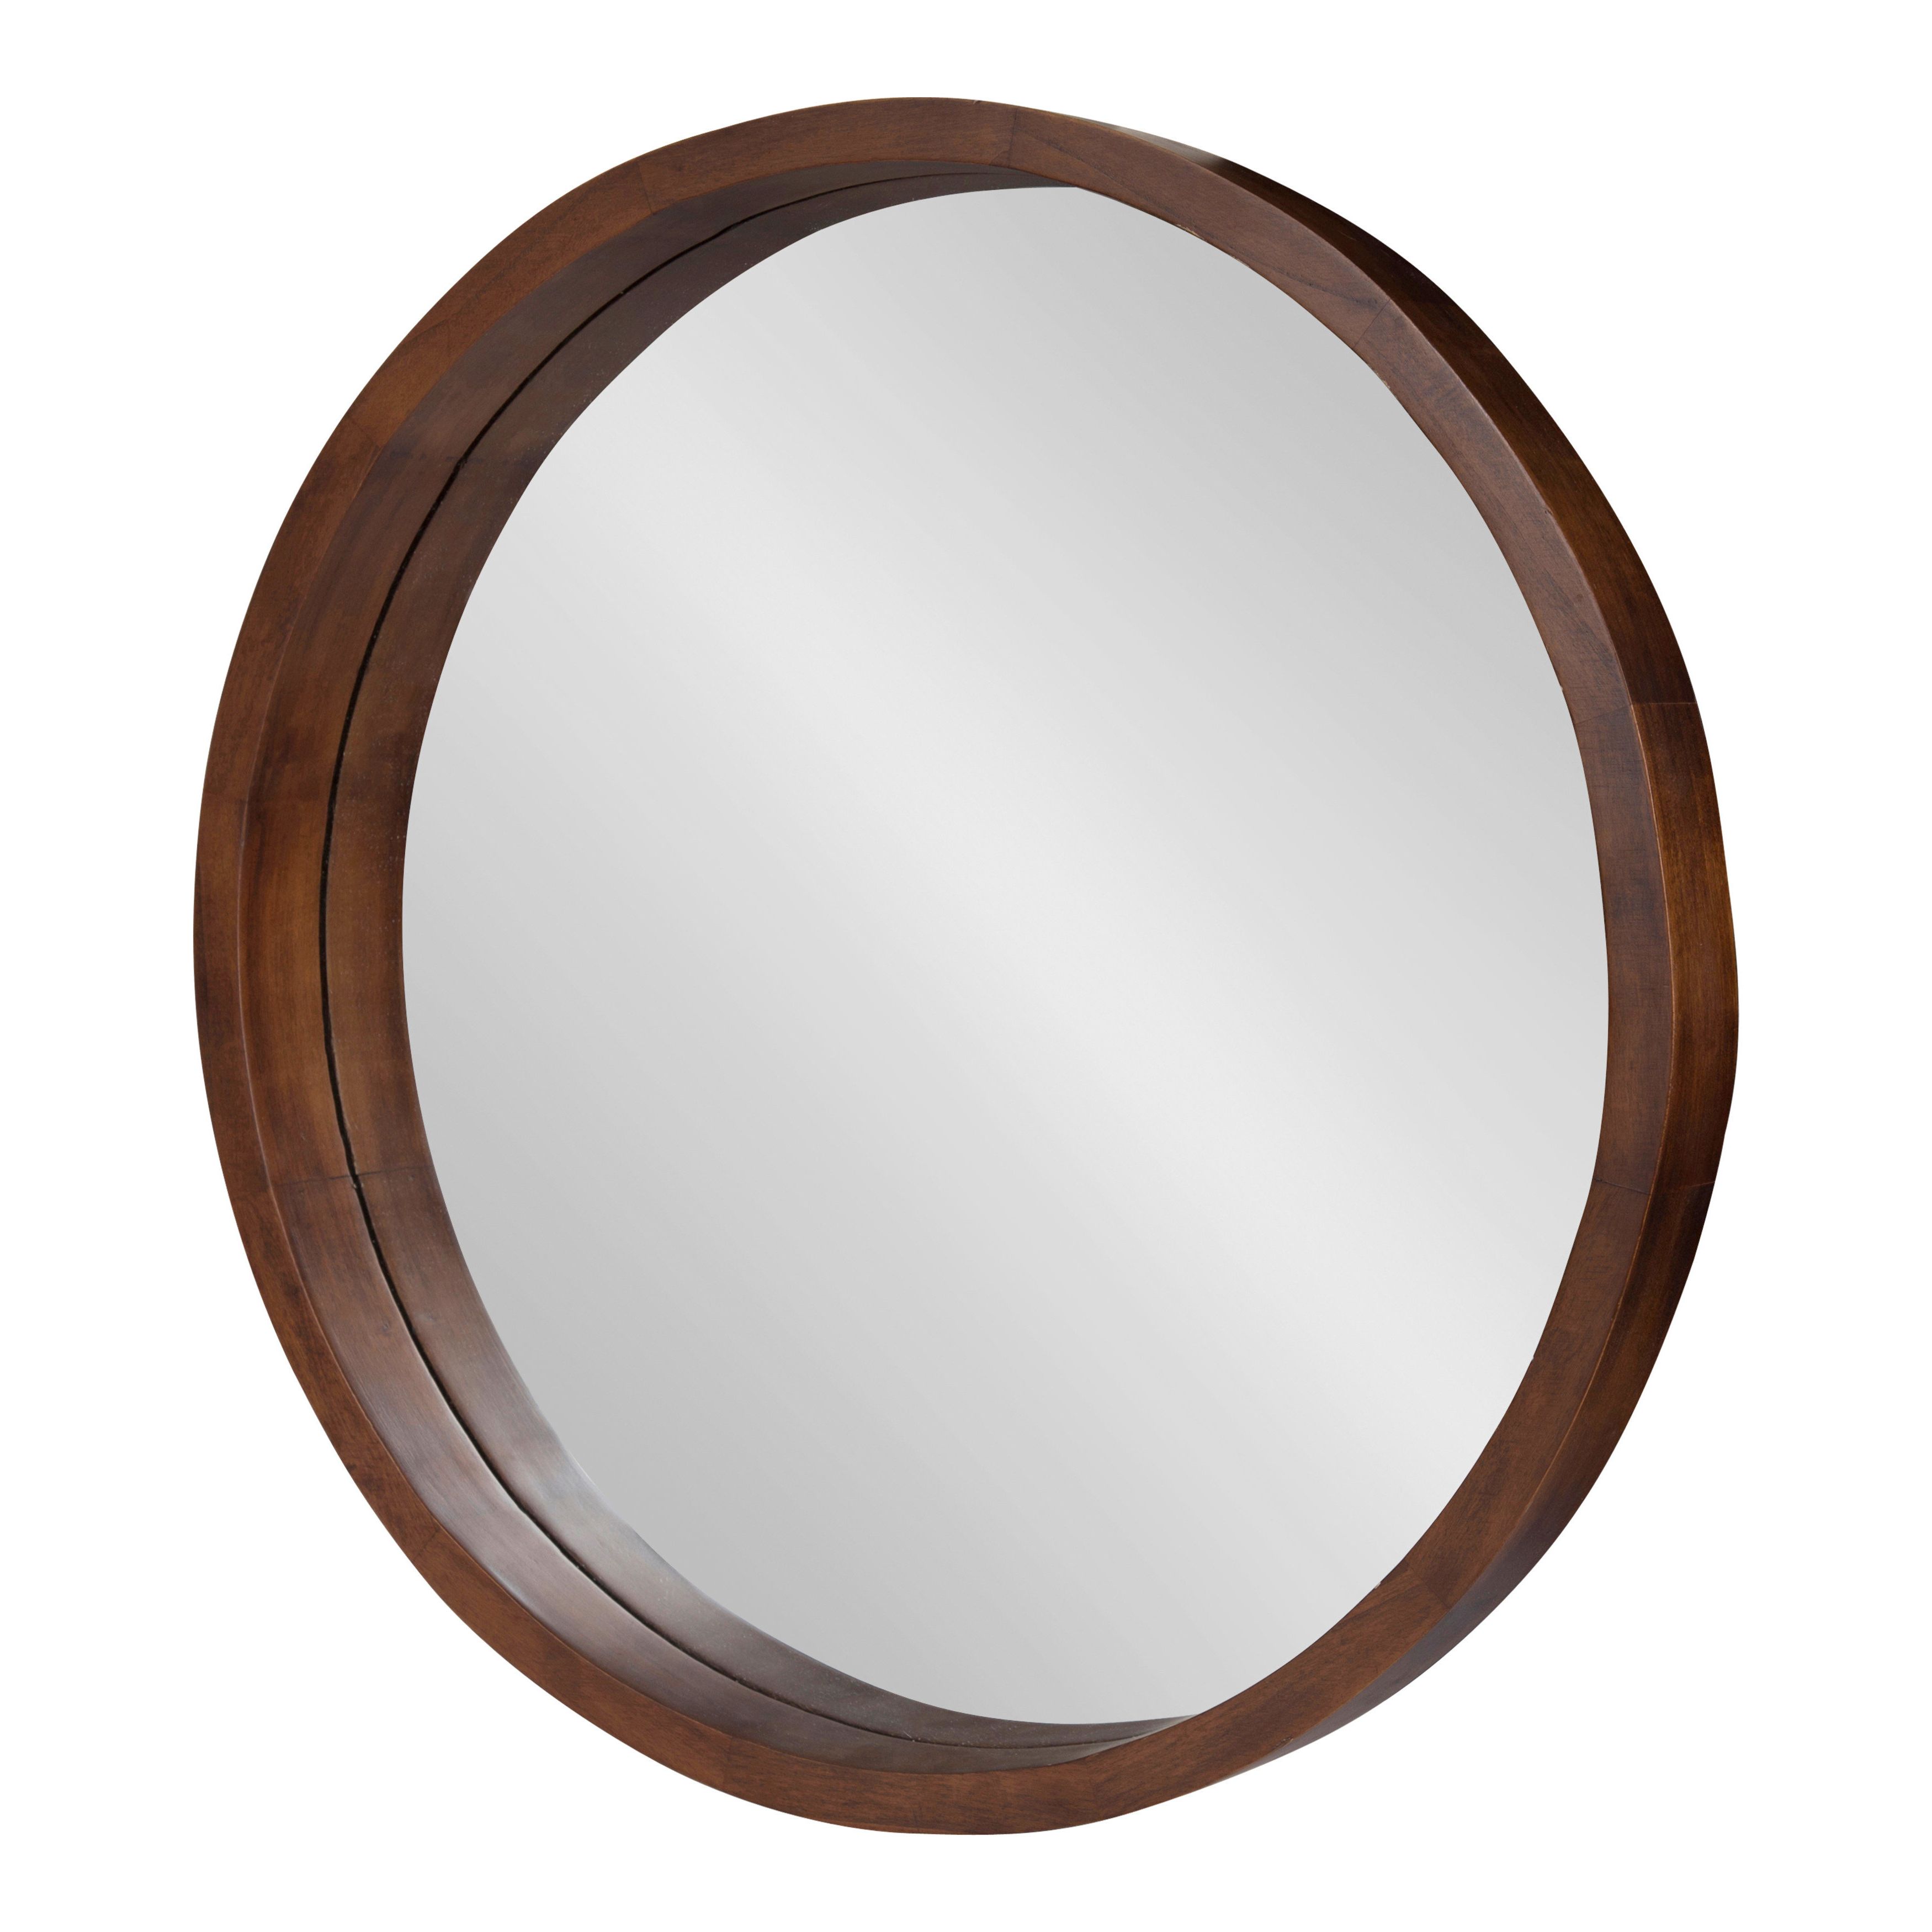 Swagger Accent Wall Mirrors Regarding Latest Loftis Decorative Wall Mirror (View 10 of 20)